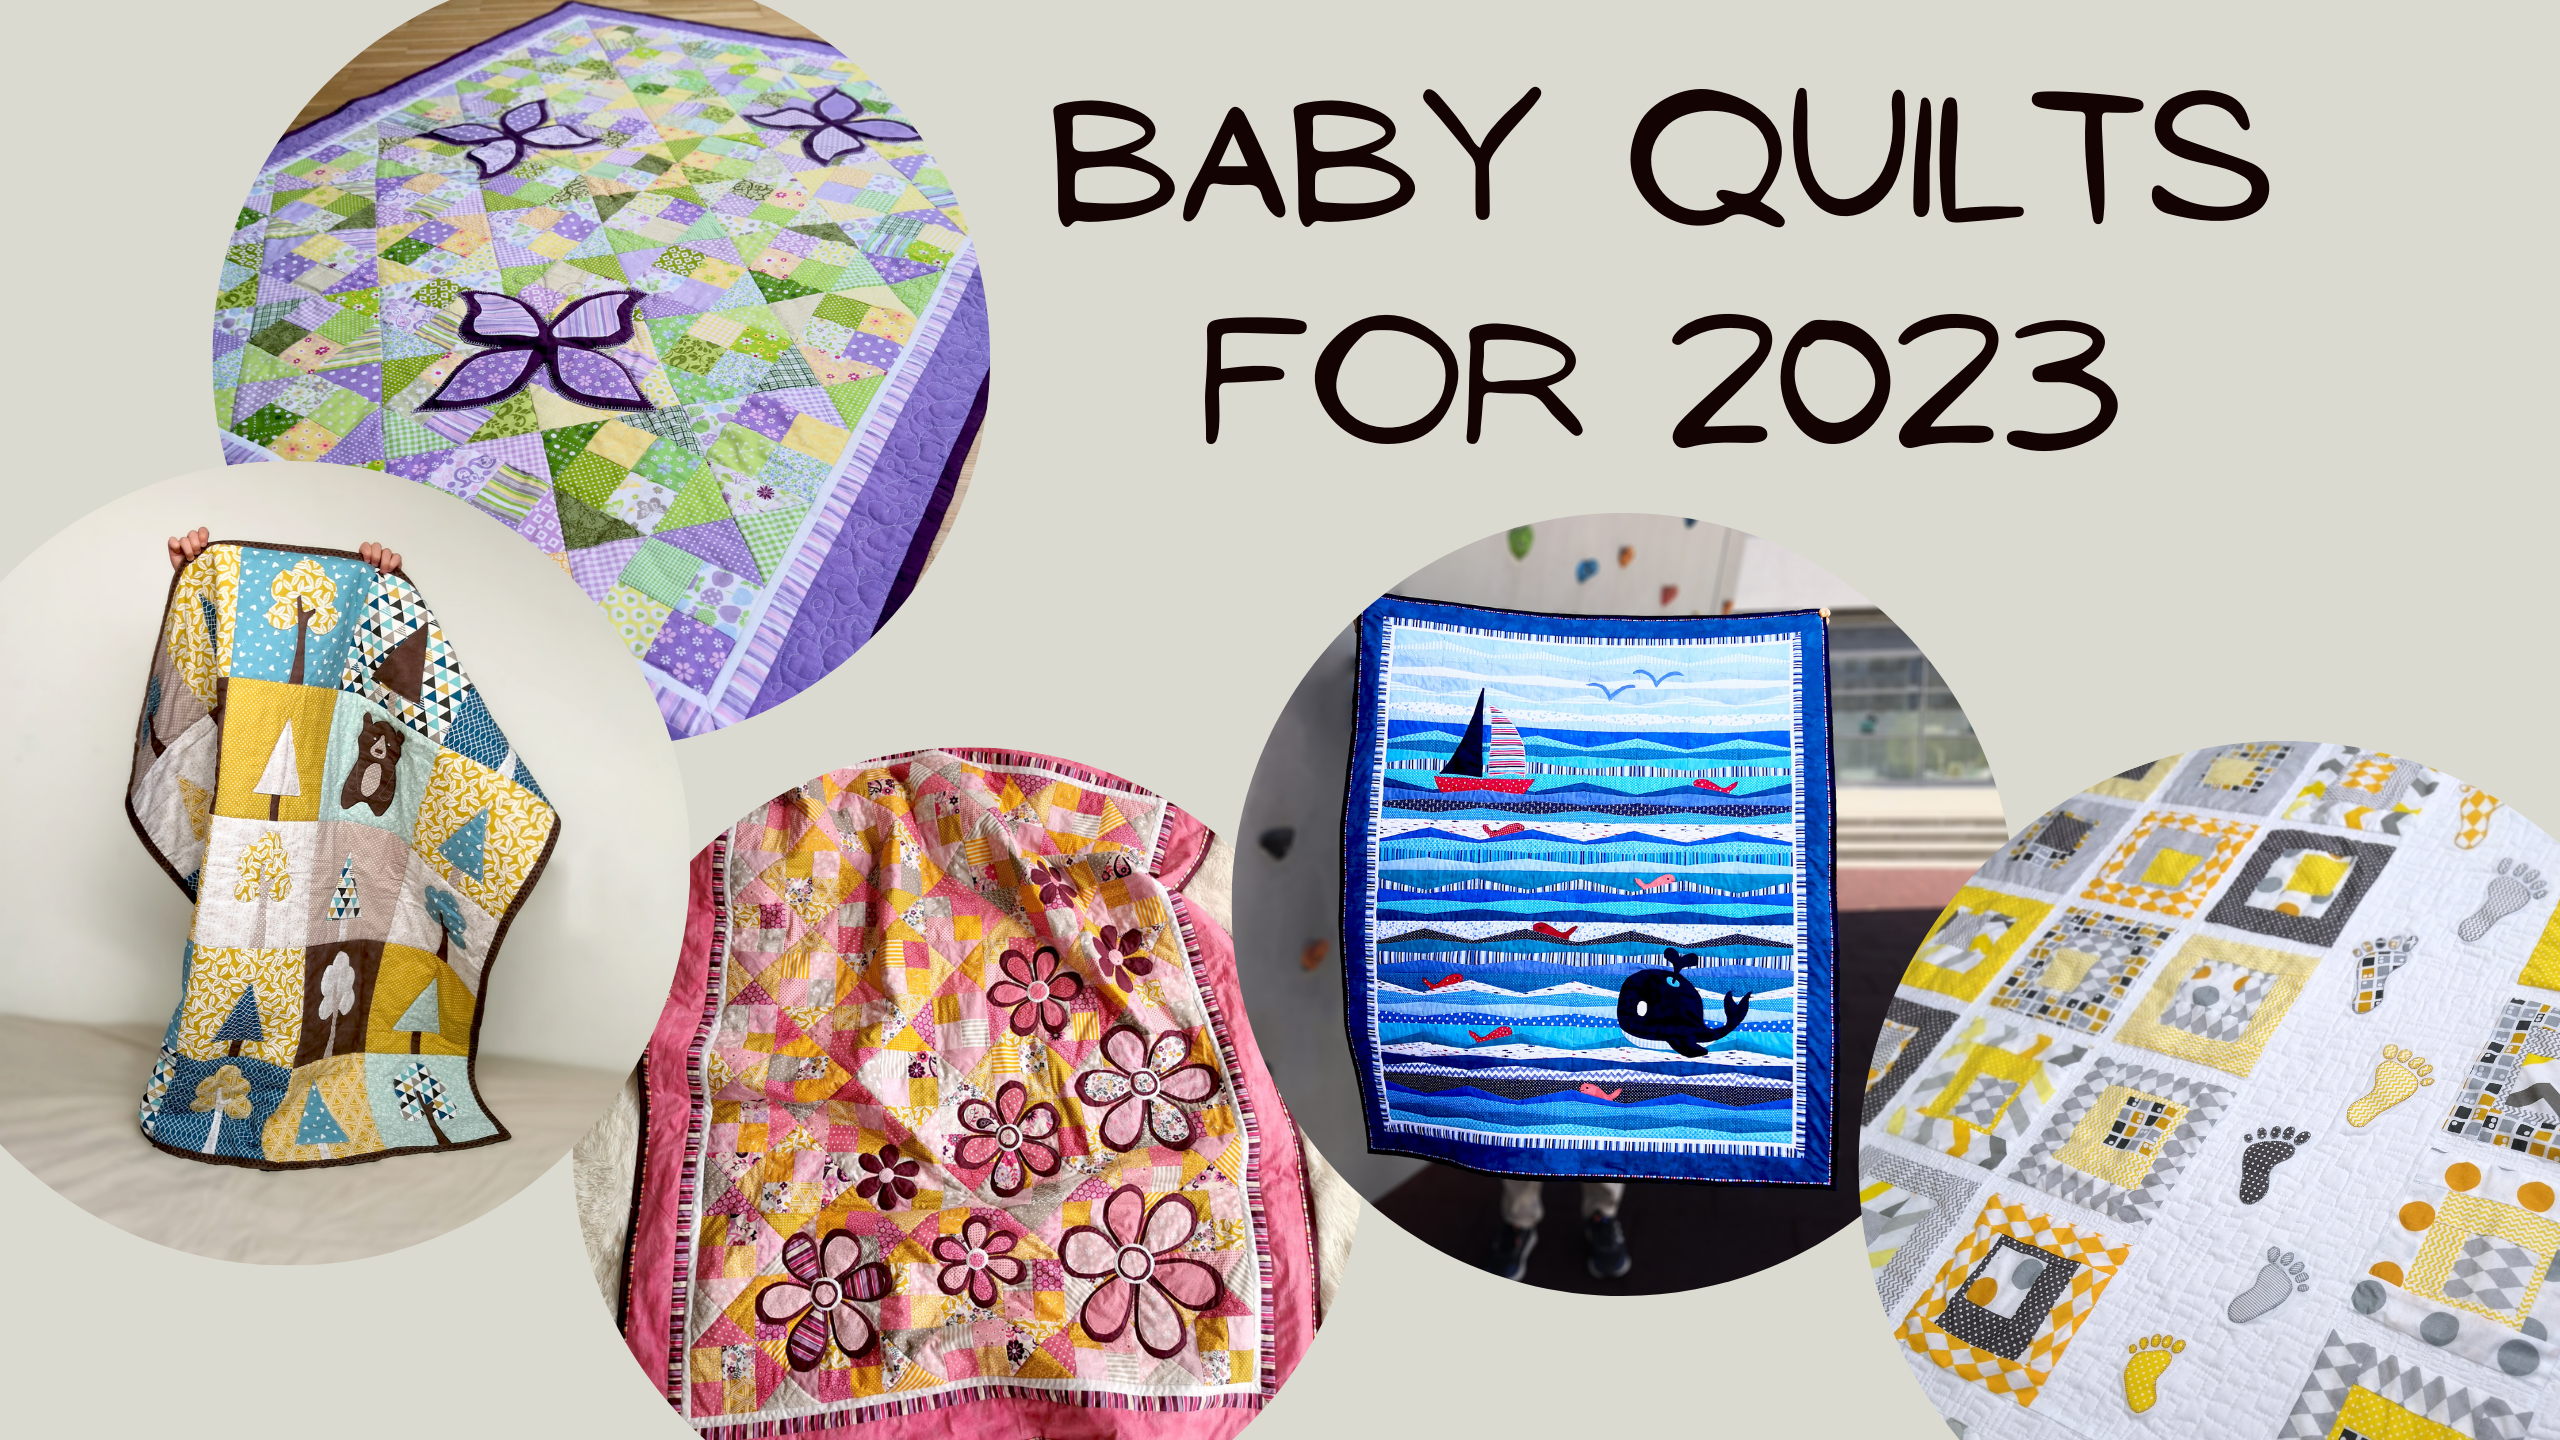 Baby quilts for 2023